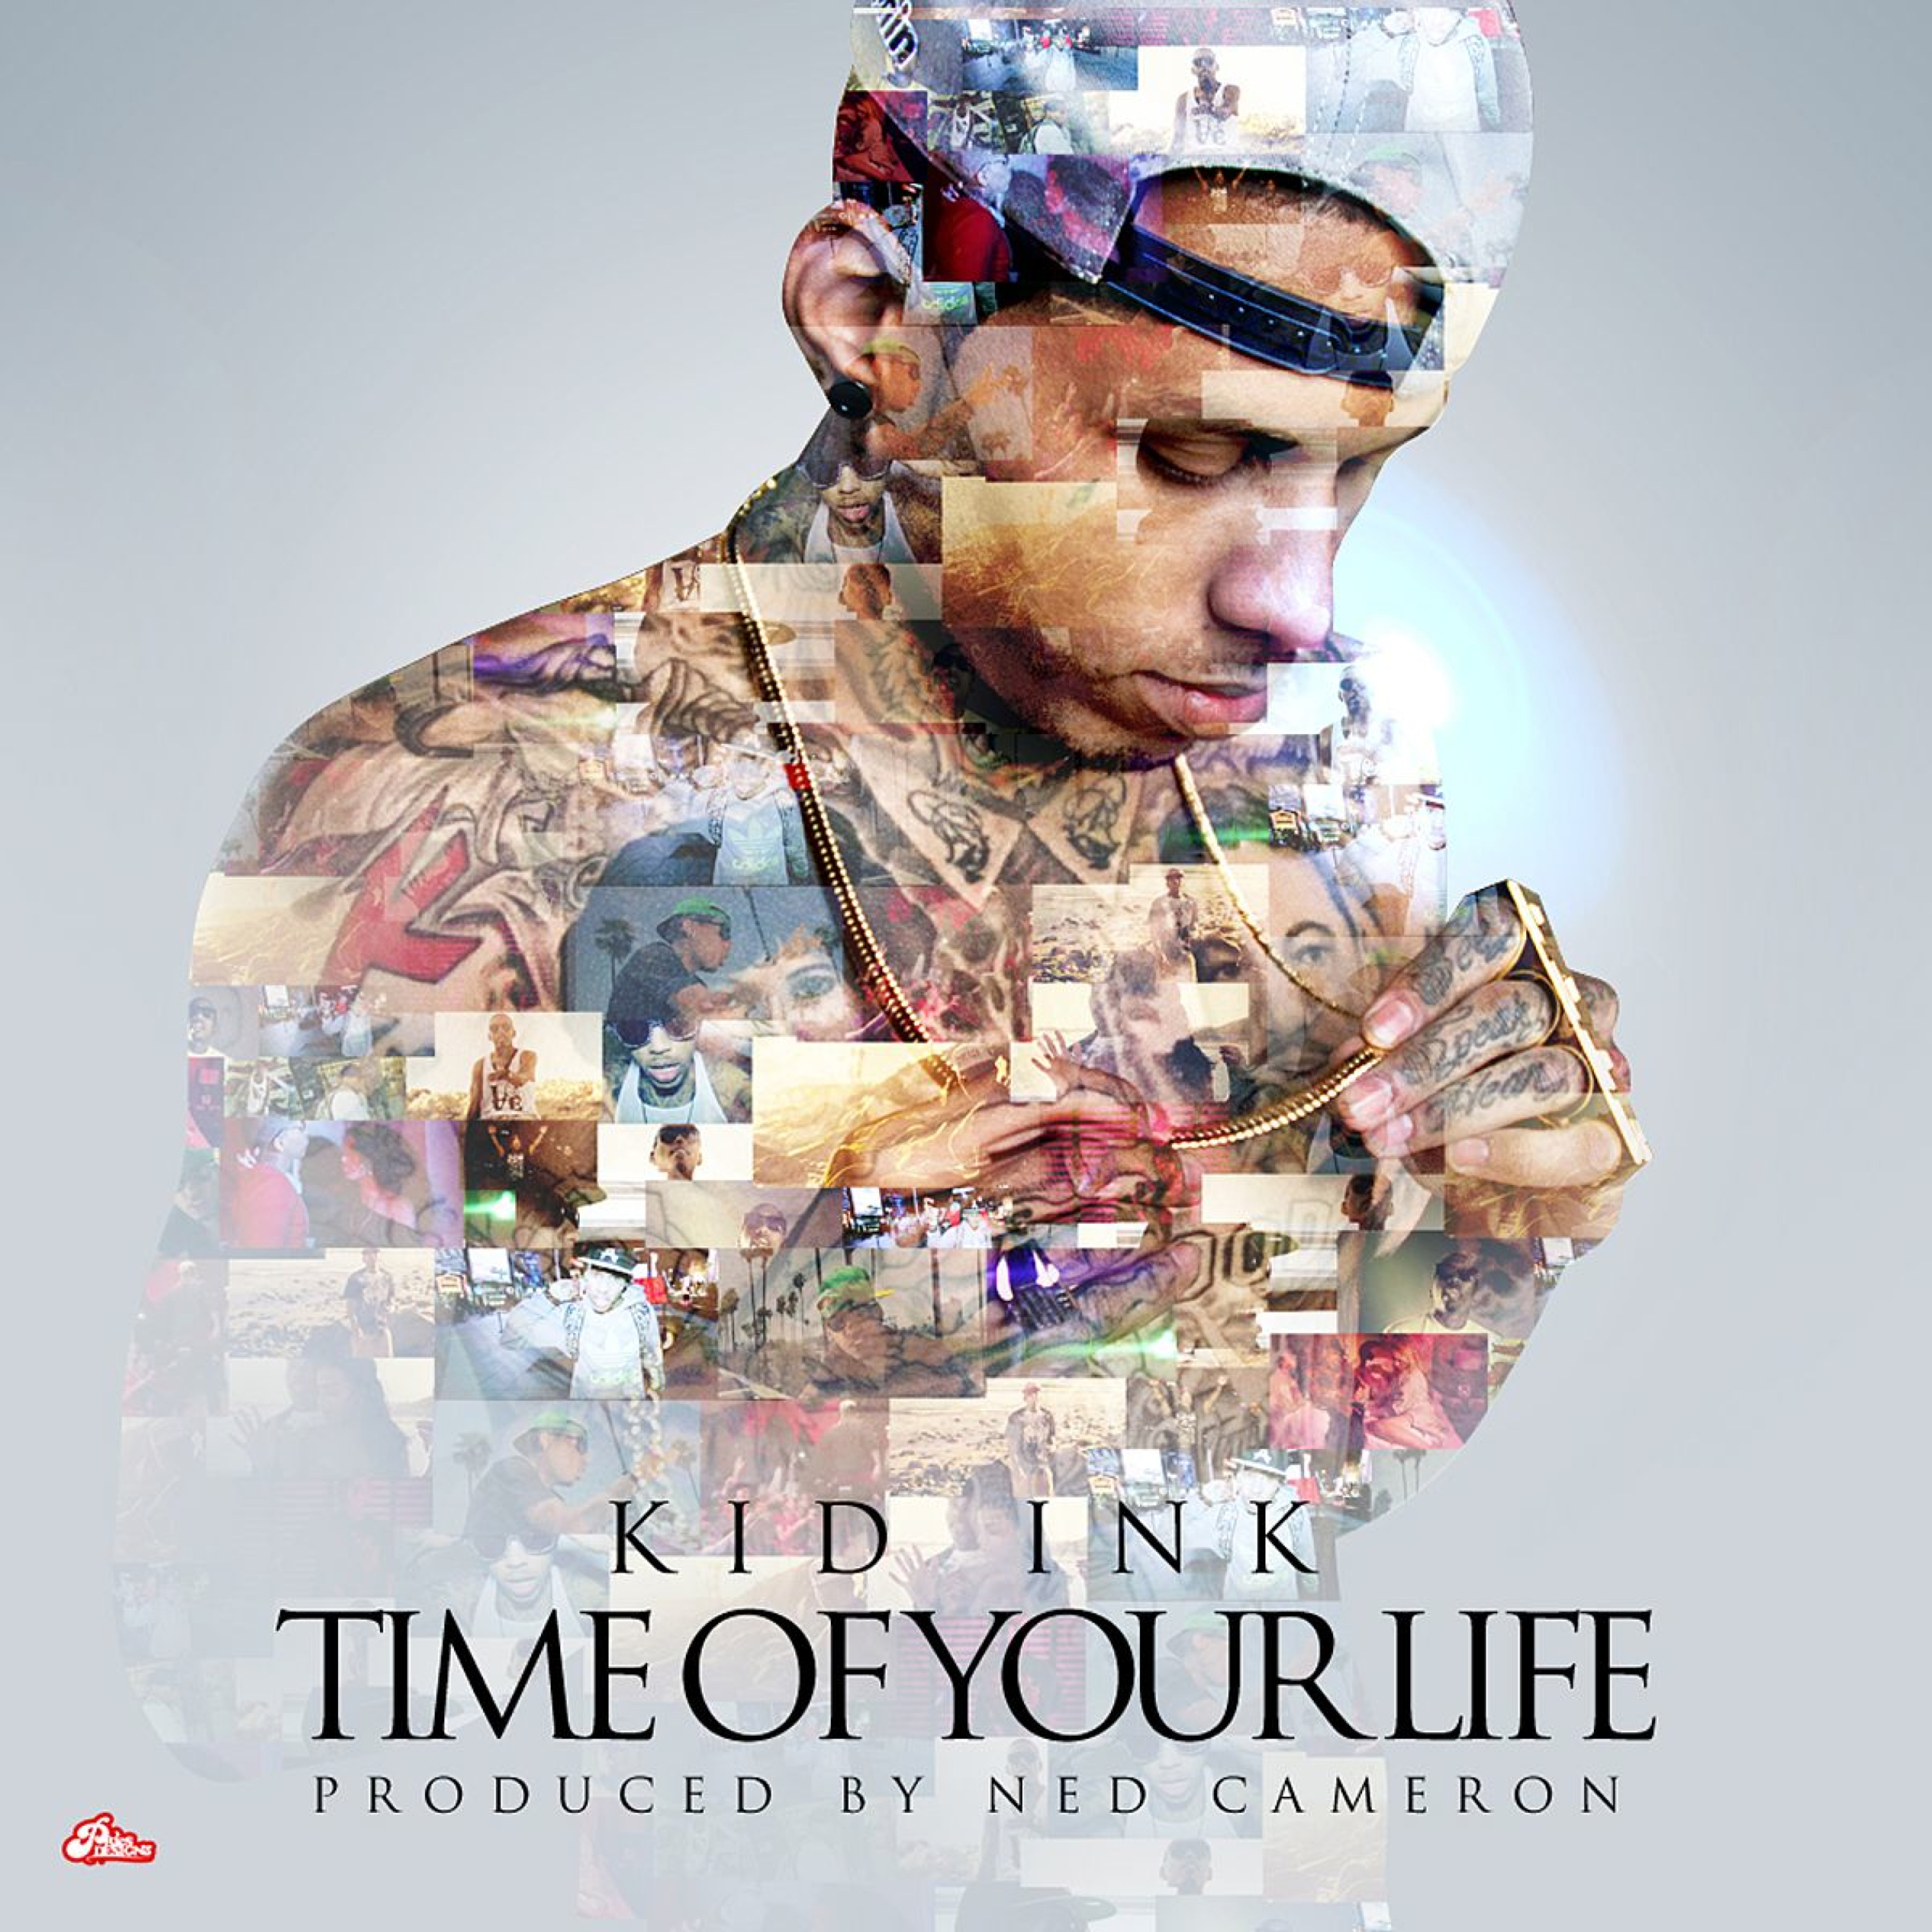 Time Of Your Life (Instrumental)